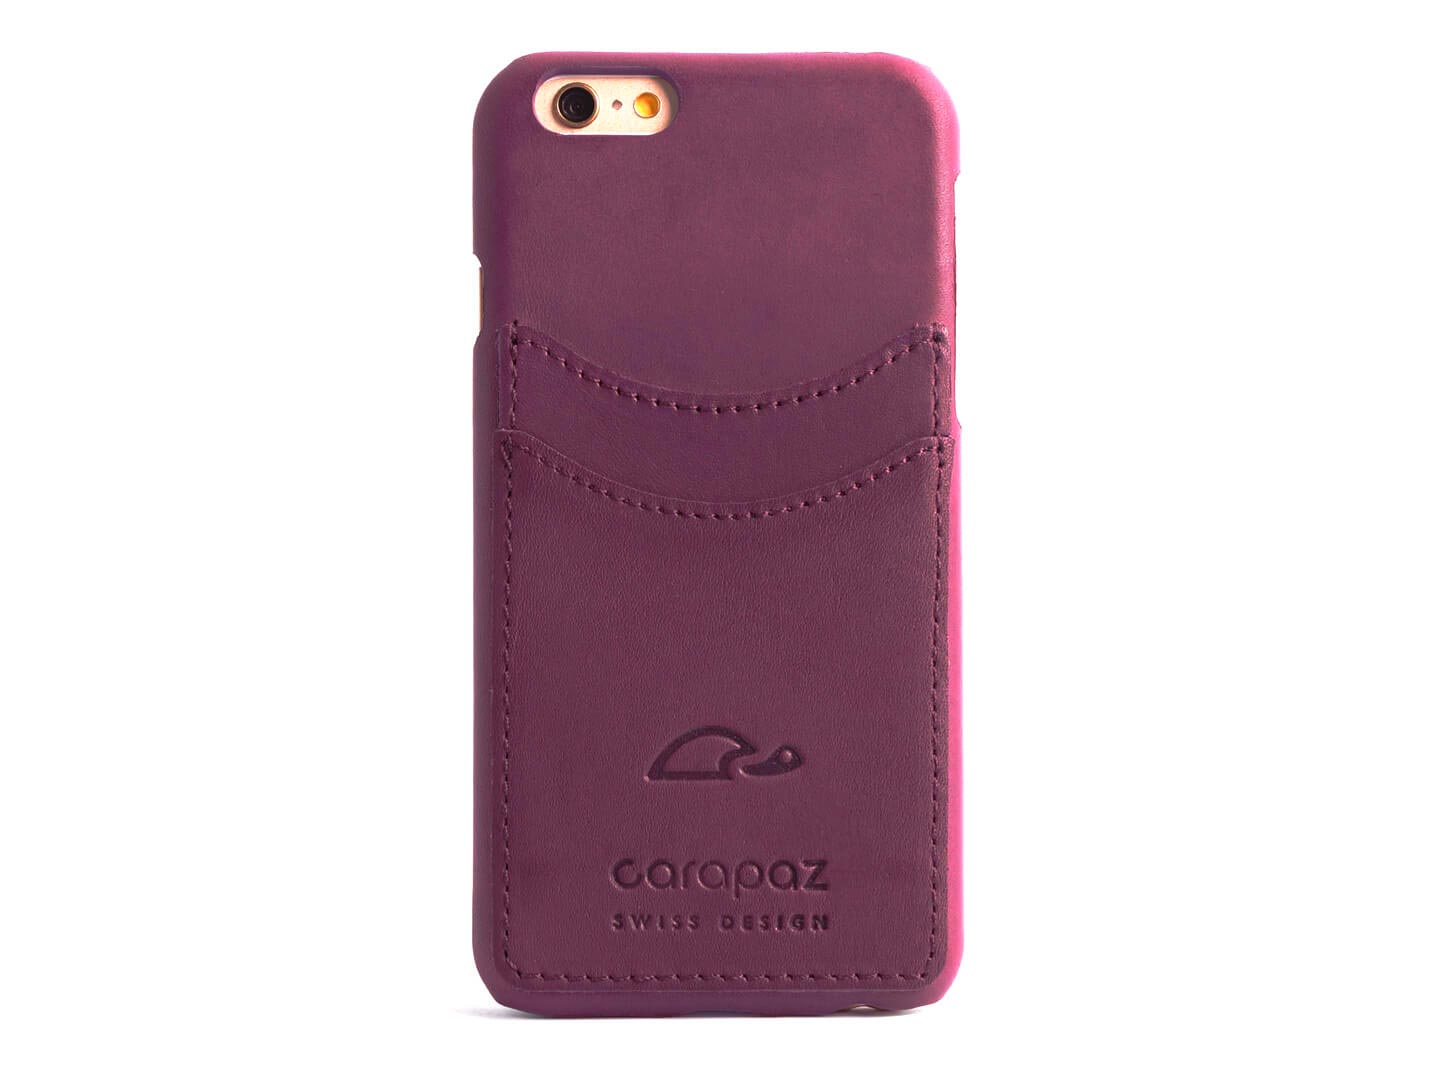 iPhone 6 leather cover purple - Carapaz